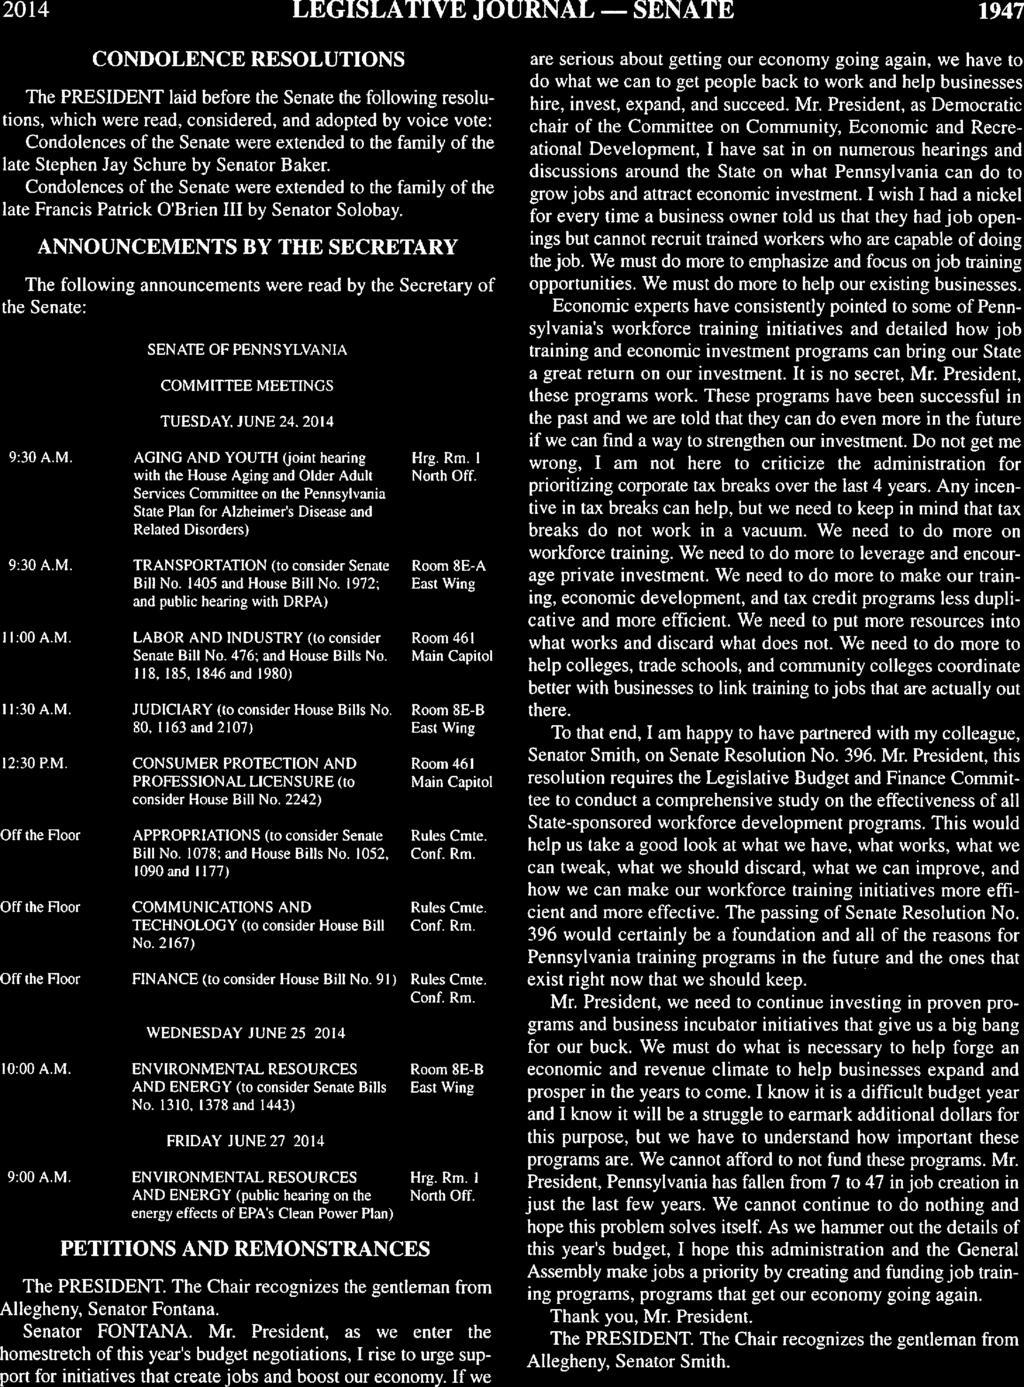 2014 LEGISLATIVE JOURNAL - SENATE 1947 CONDOLENCE RESOLUTIONS The PRESIDENT laid before the Senate the following resolutions, which were read, considered, and adopted by voice vote: Condolences of